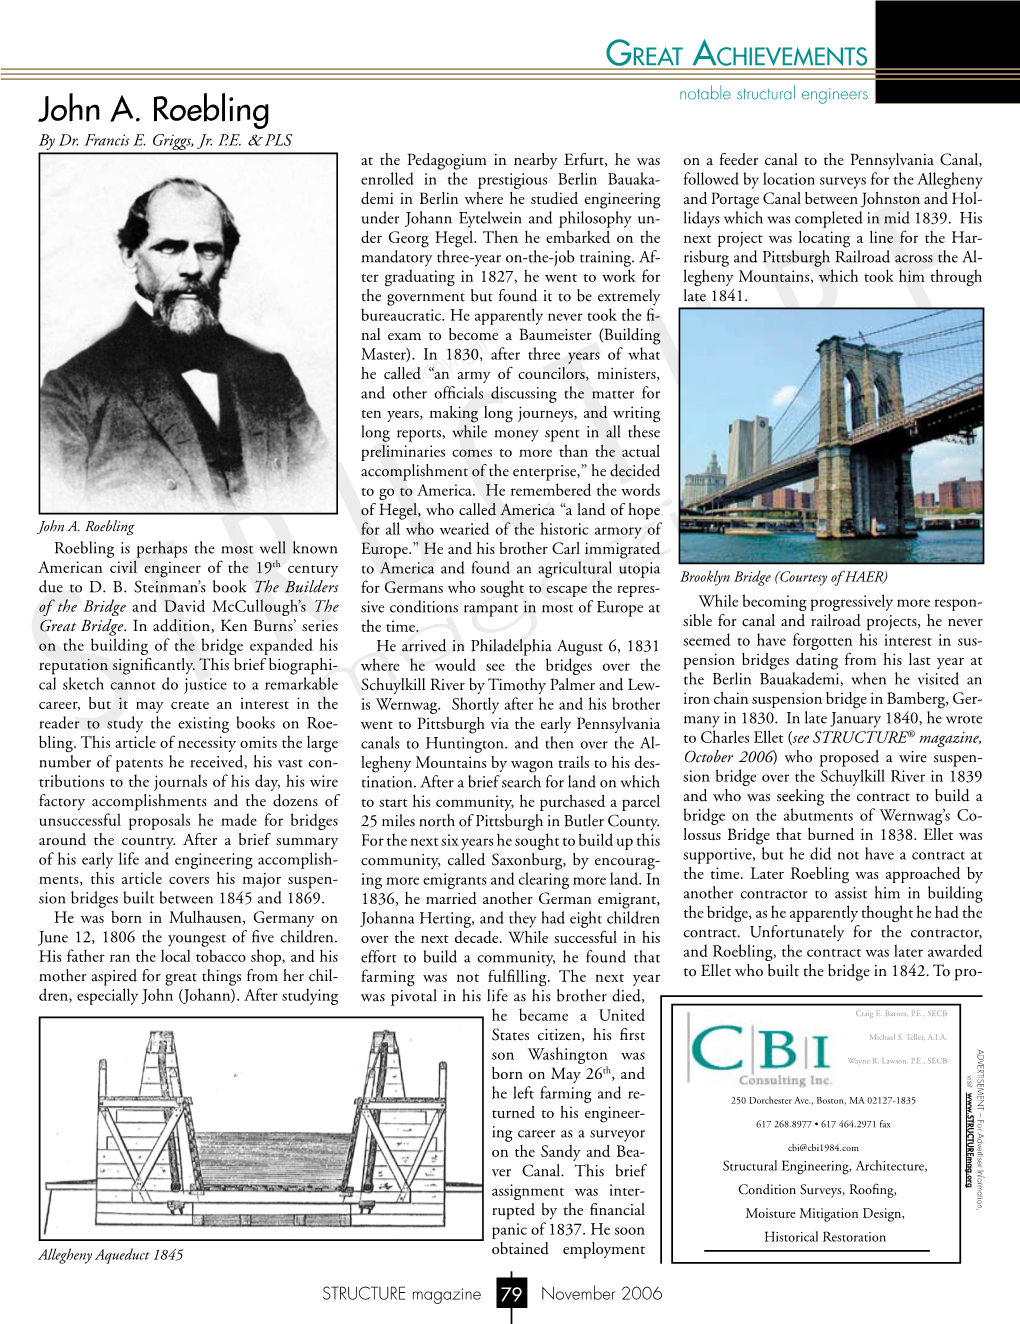 John A. Roebling by Dr